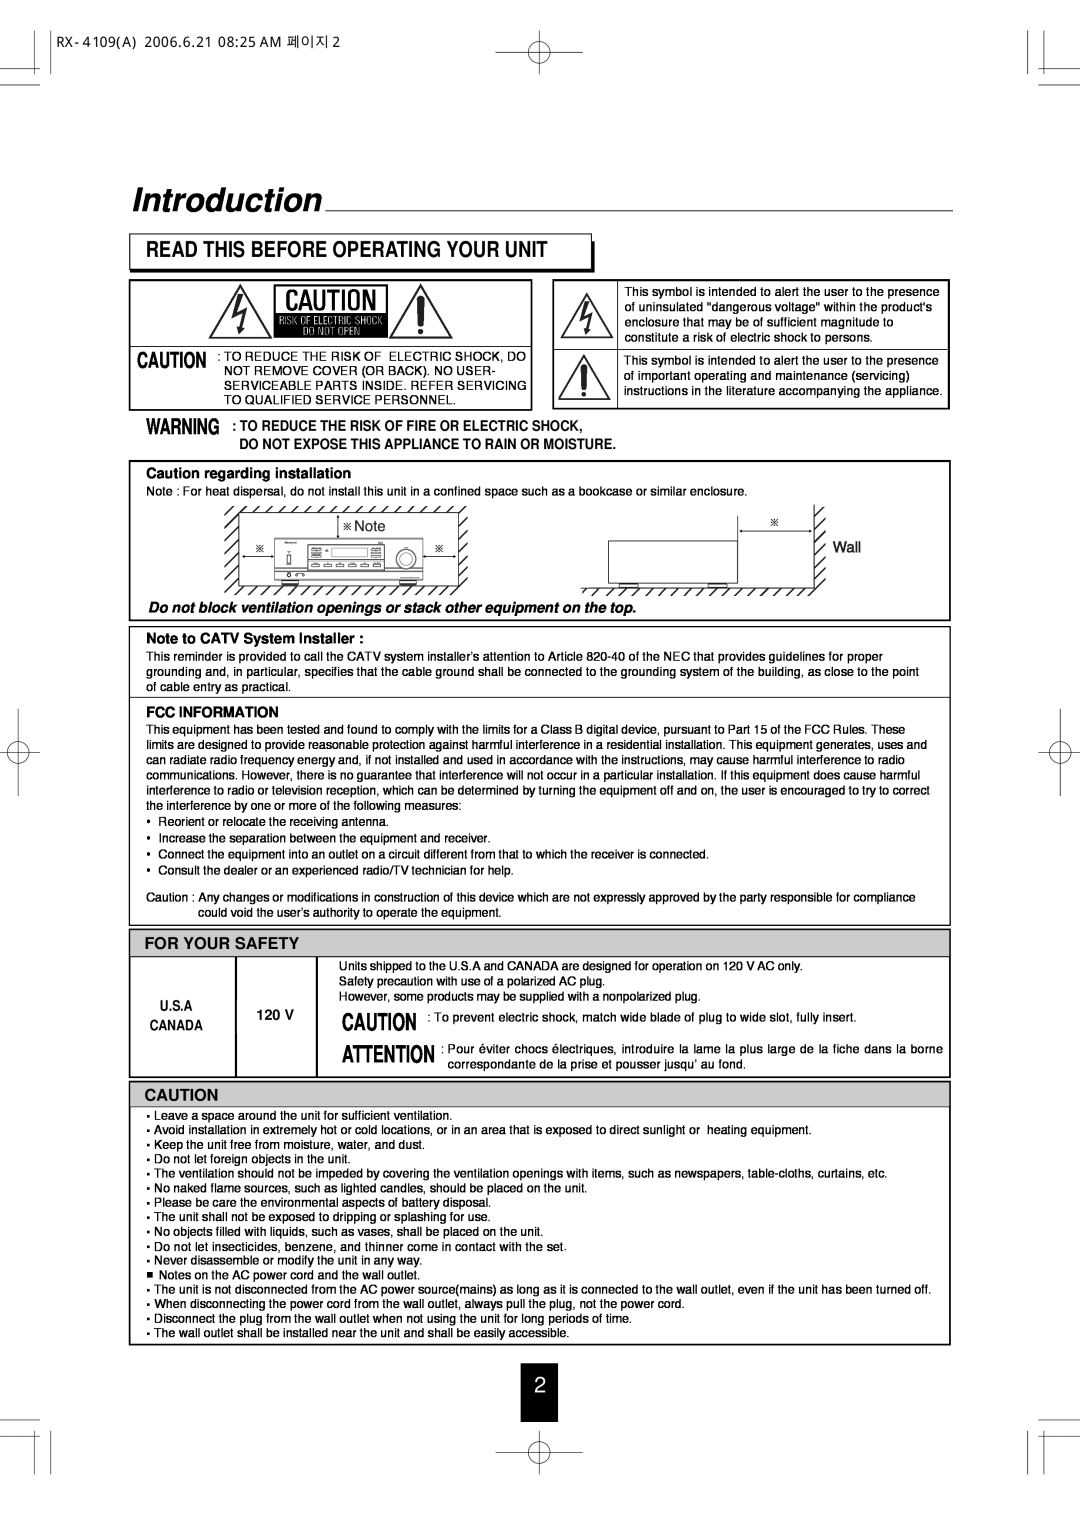 Sherwood manual Introduction, Read This Before Operating Your Unit, For Your Safety, RX-4109A 2006.6.21 0825 AM 페이지 